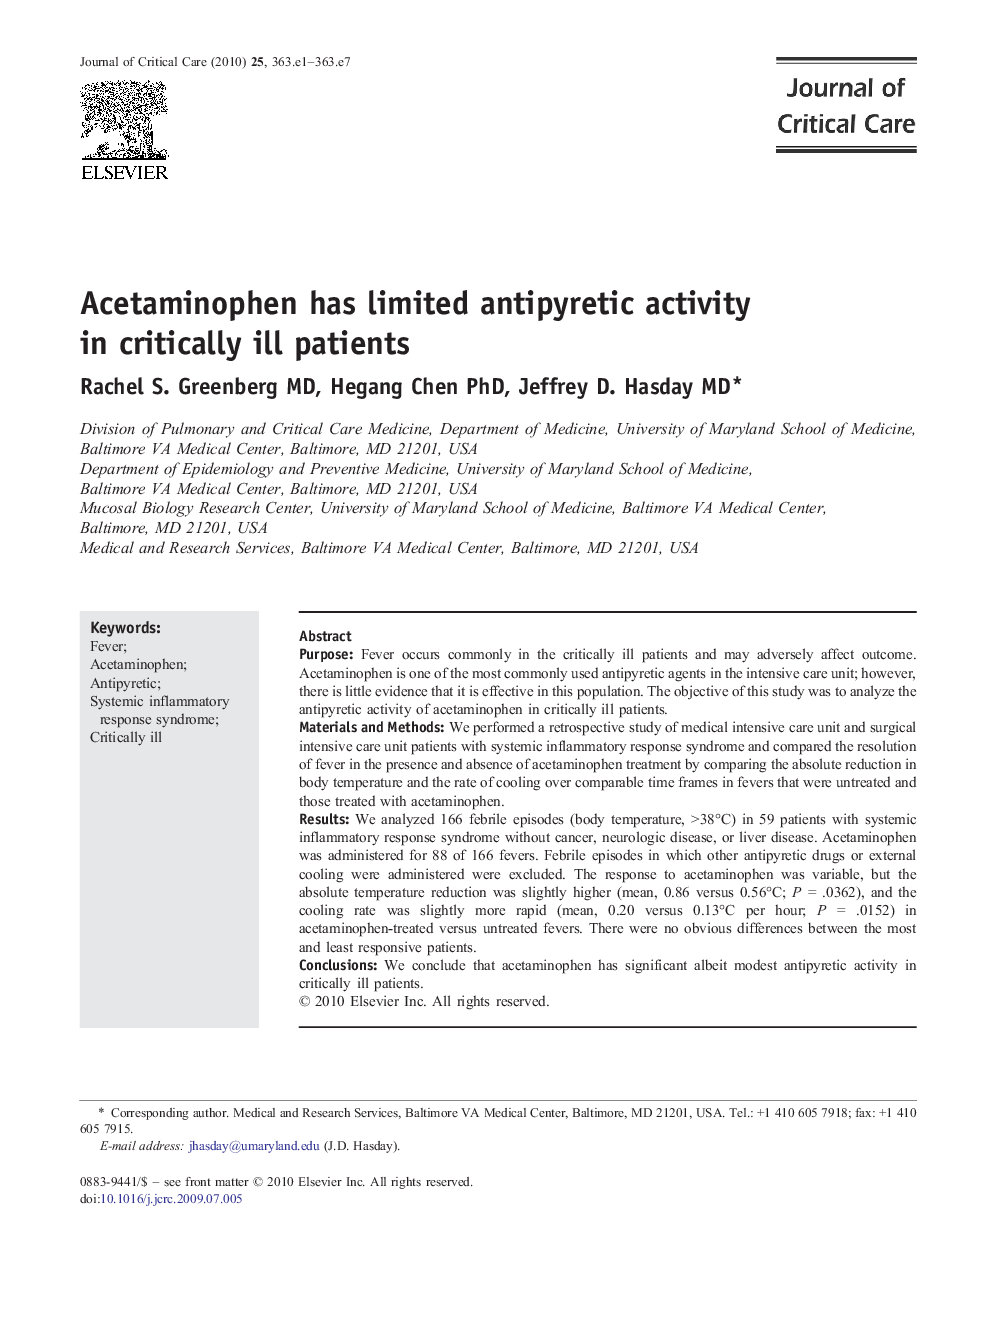 Acetaminophen has limited antipyretic activity in critically ill patients